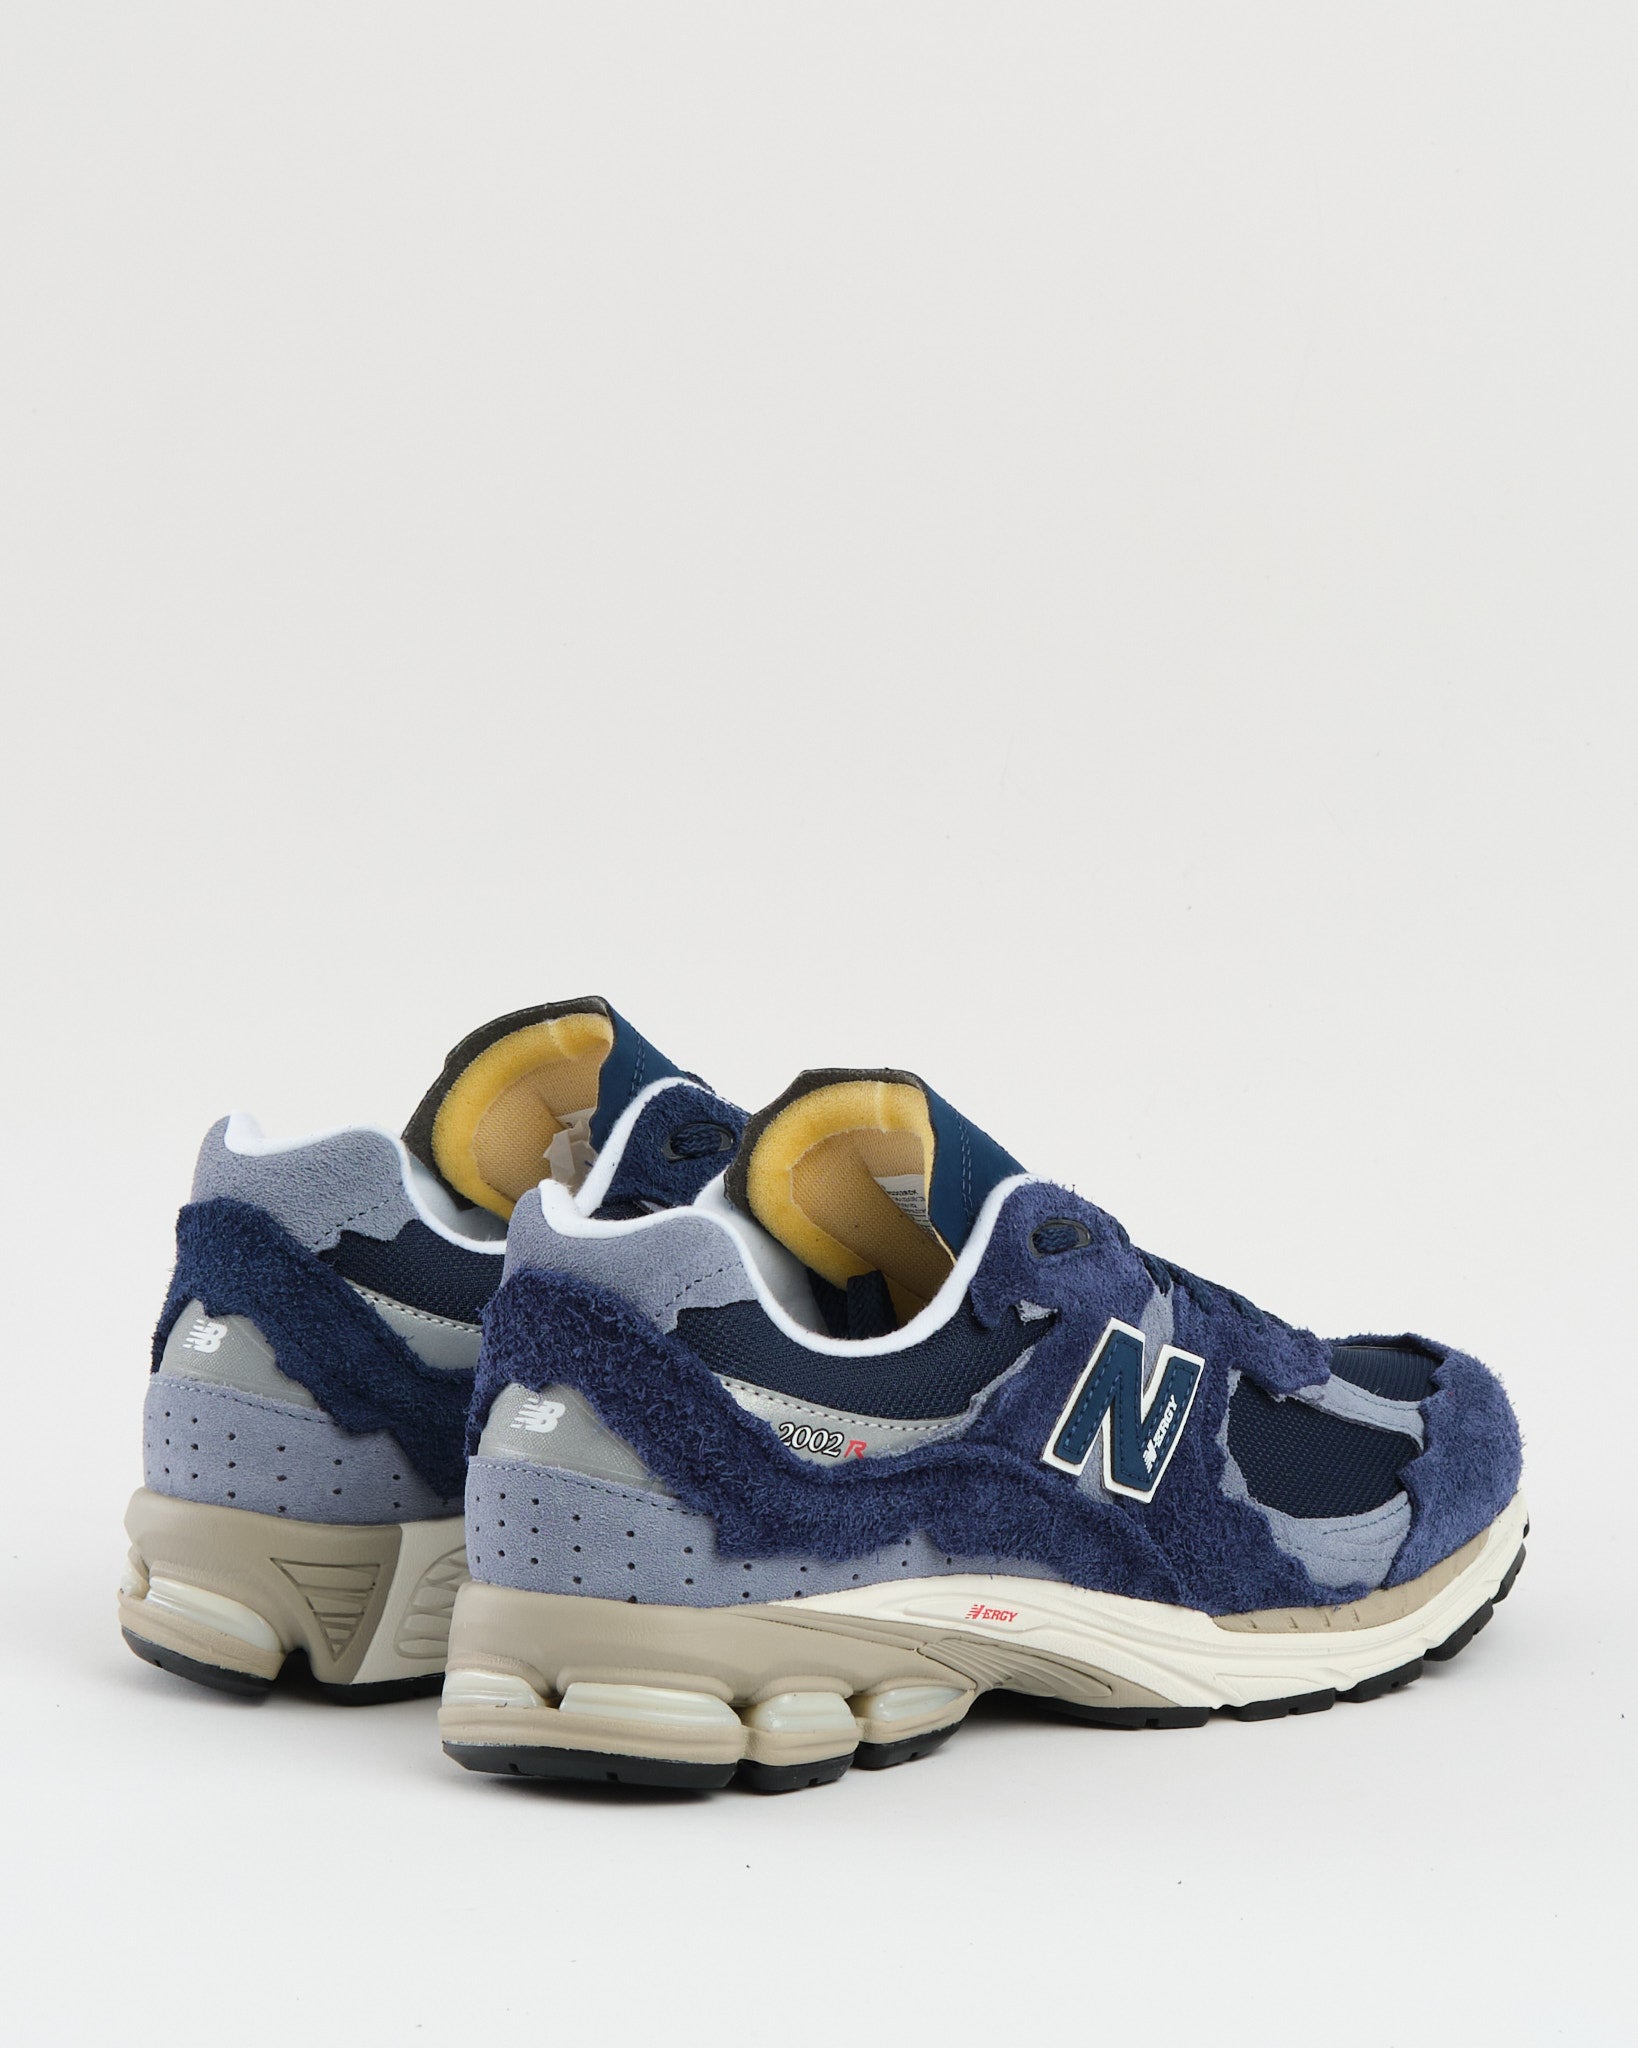 2002R Protection Pack NB NAVY M2002RDK - Meadow